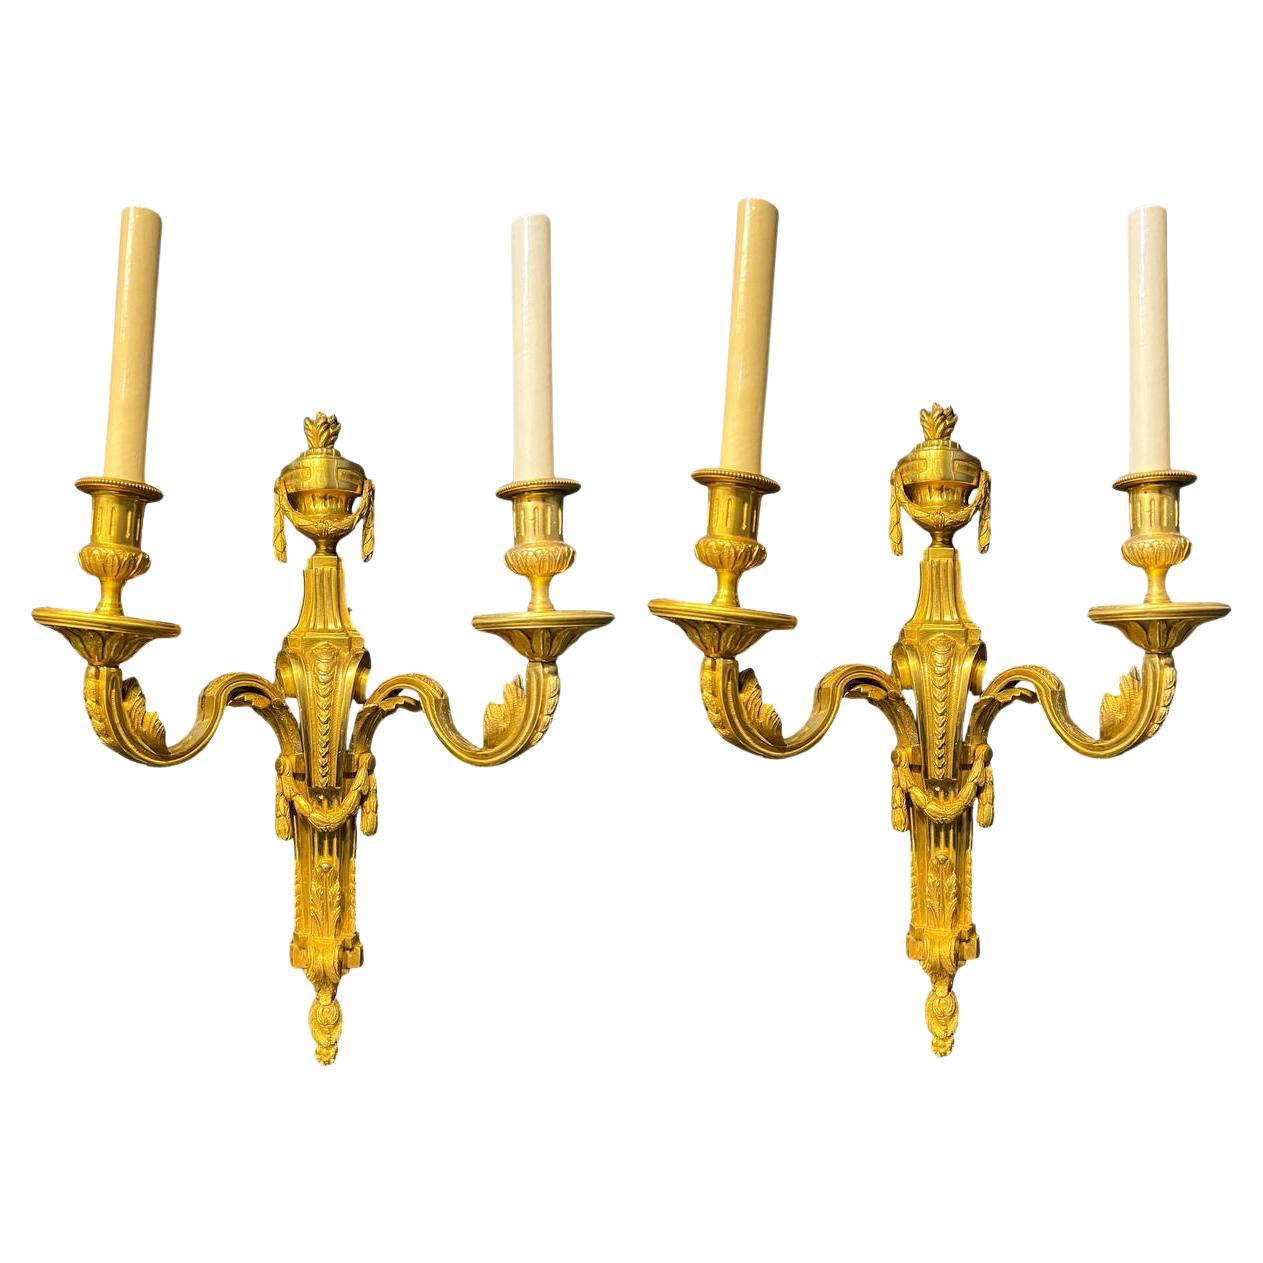 1900's Caldwell Gilt Bronze Sconces with 2 Lights 